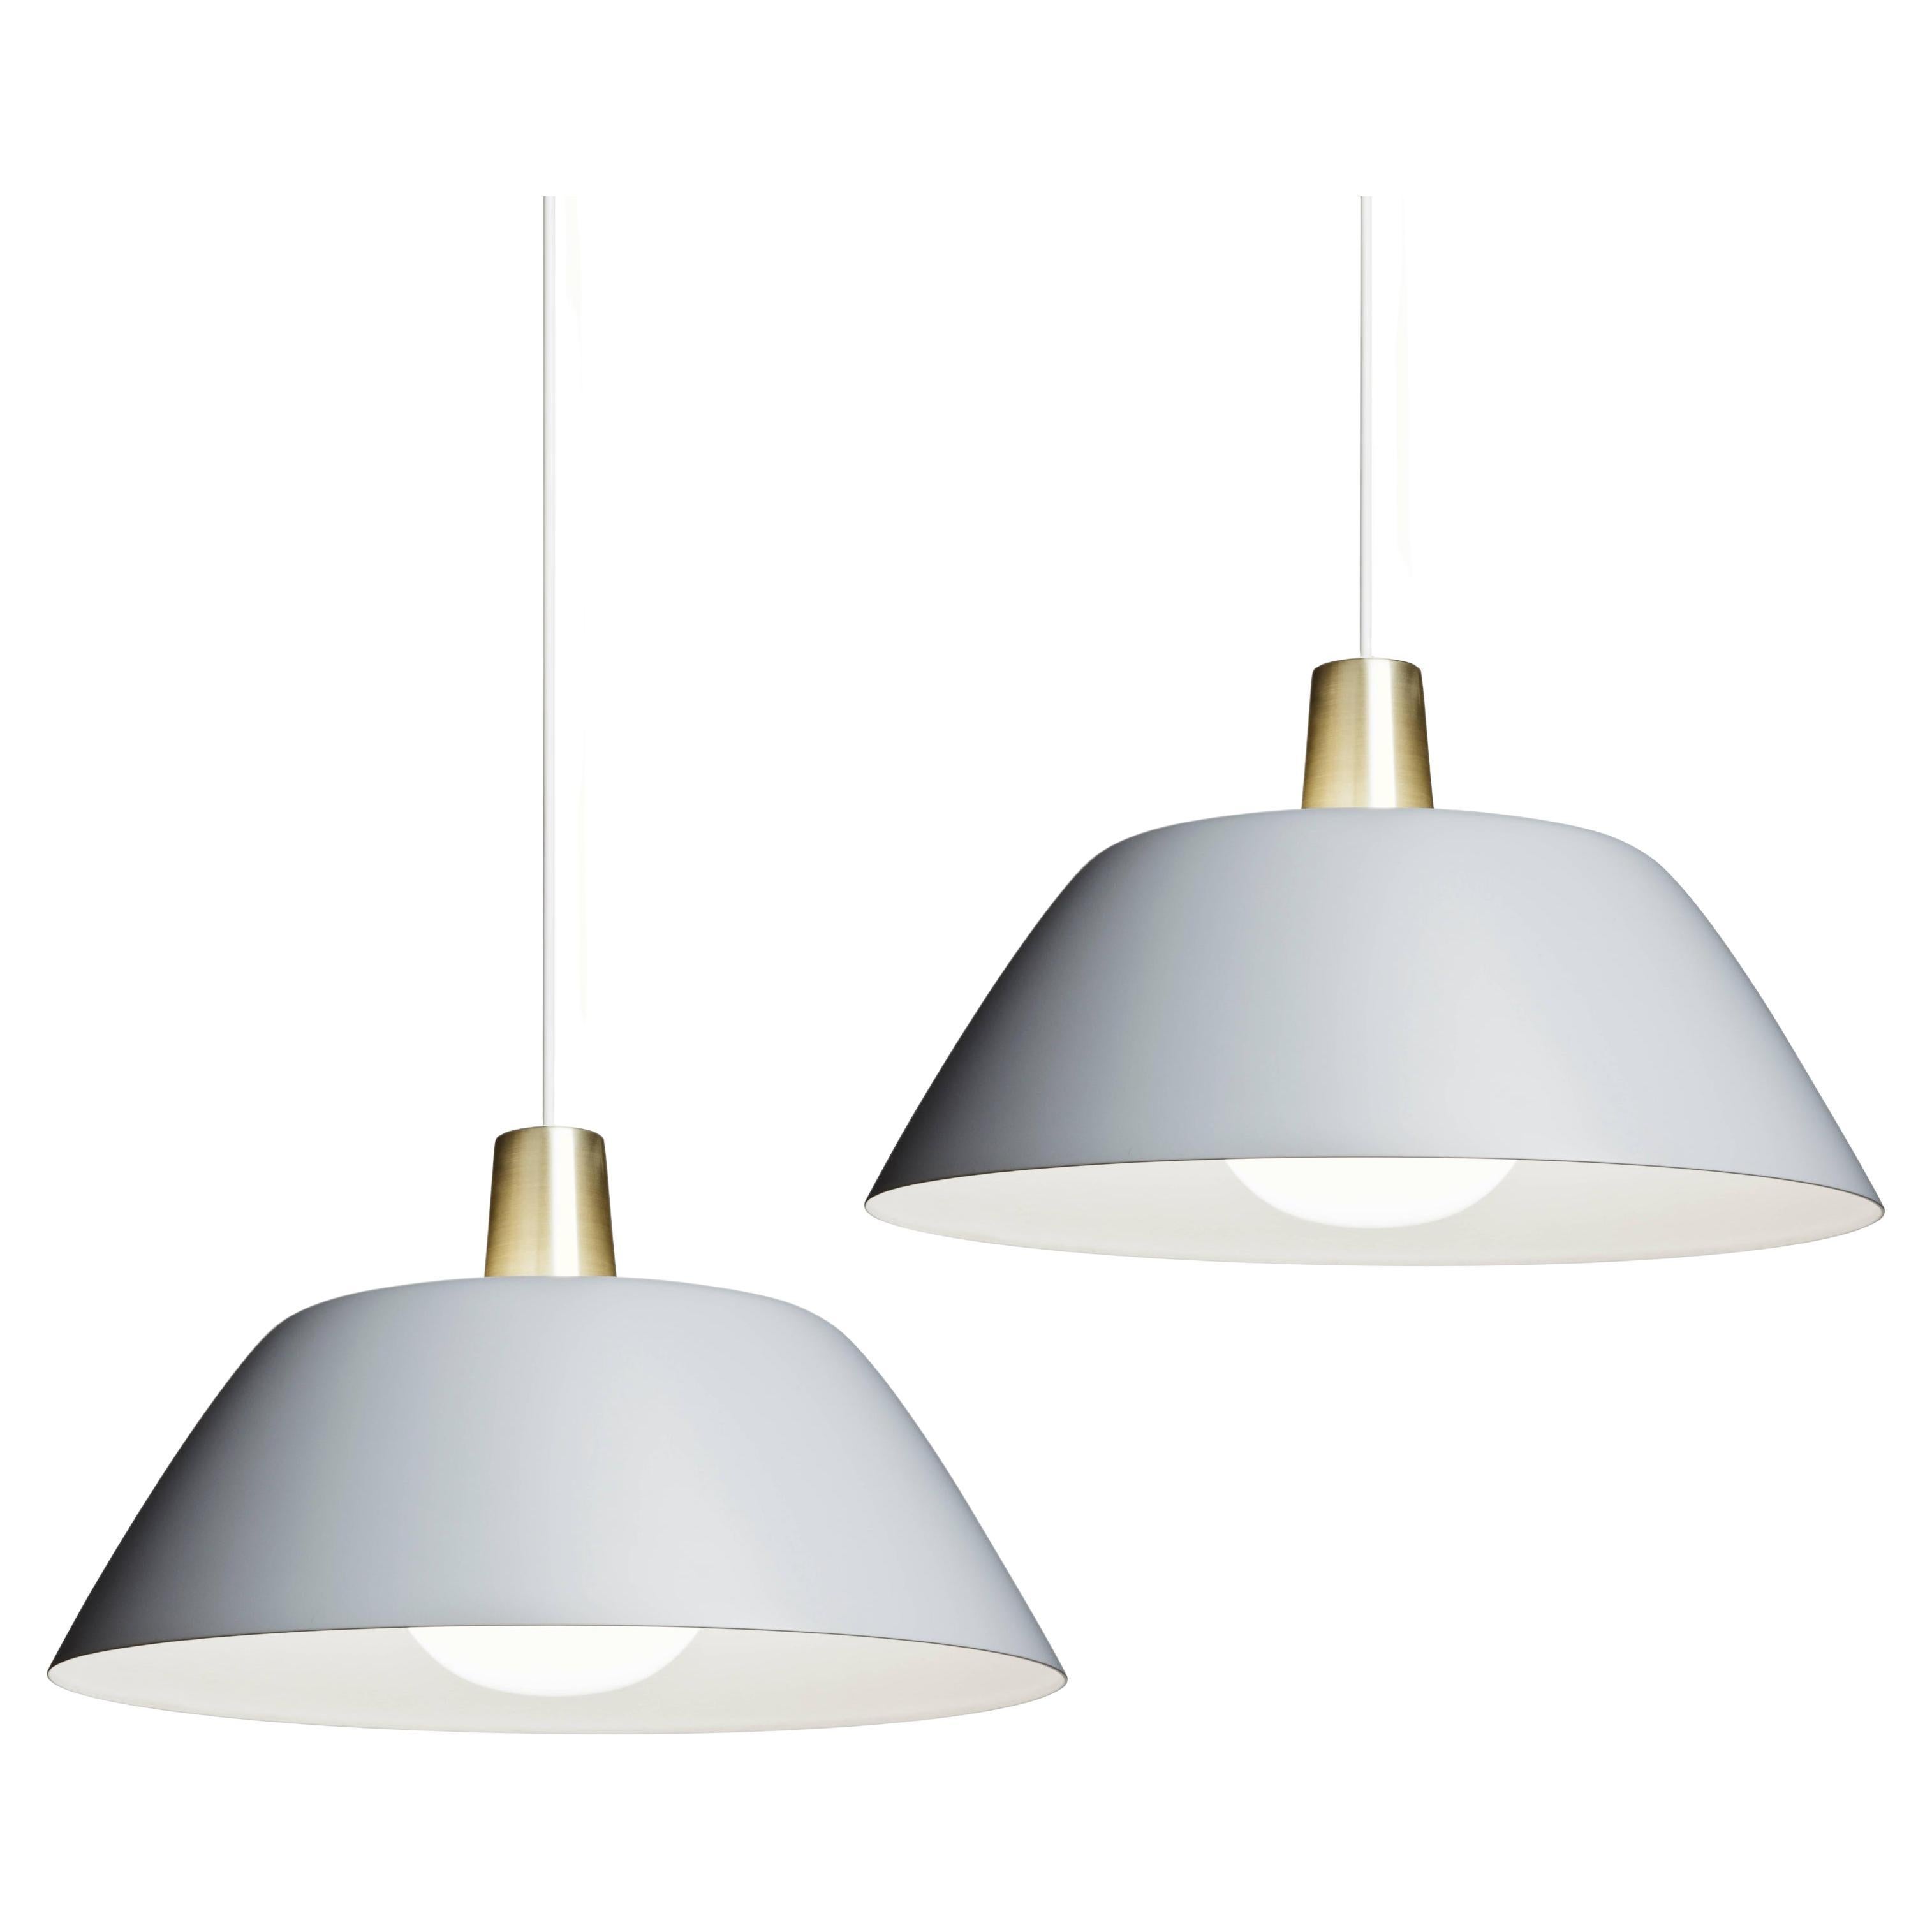 Pair of Lisa Johansson-Pape 'Ihanne' Pendant Lamps for Innolux Oy in Gray